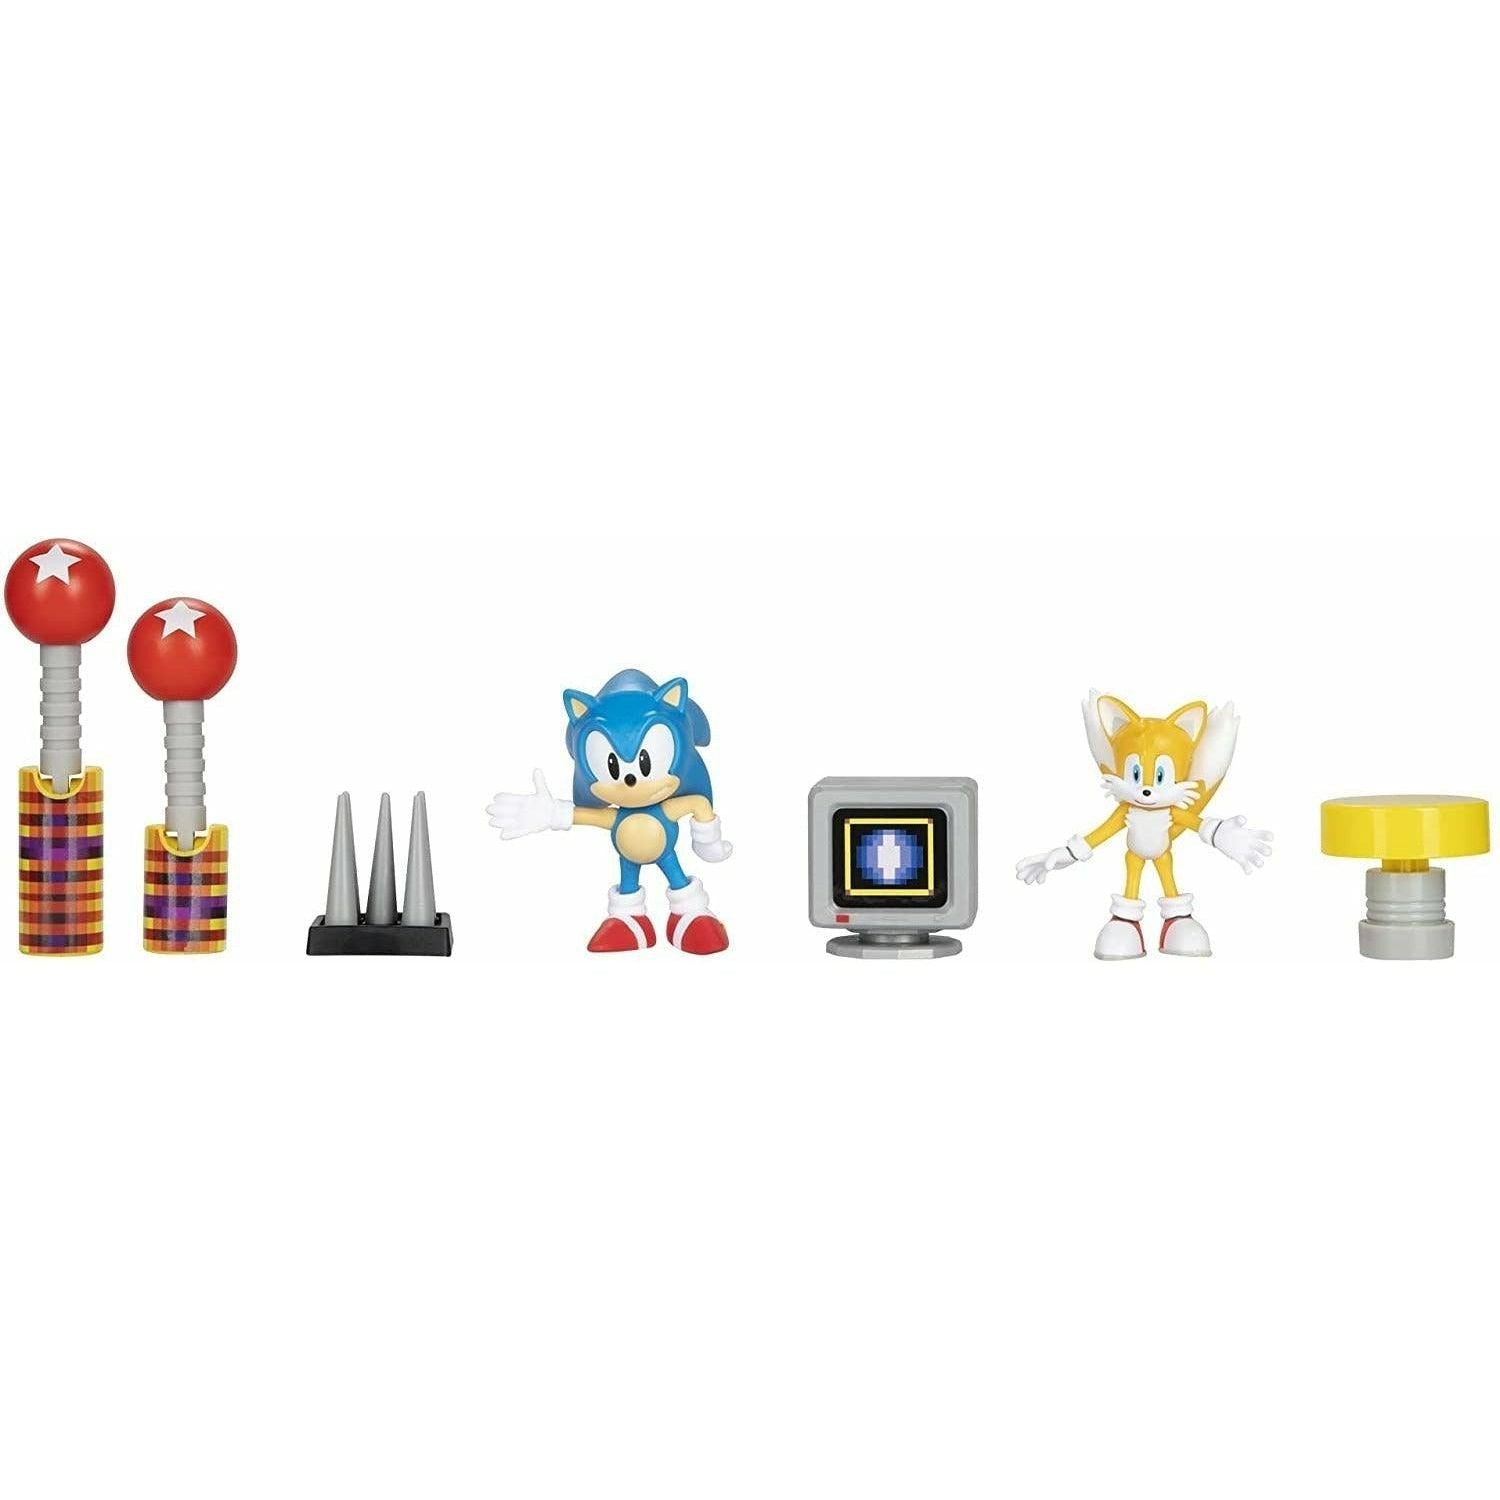 Sonic The Hedgehog 2.5-Inch Action Figure Diorama Set - BumbleToys - 5-7 Years, 8-13 Years, Action Figures, Boys, Characters, Clearance, Girls, OXE, Pre-Order, Sonic